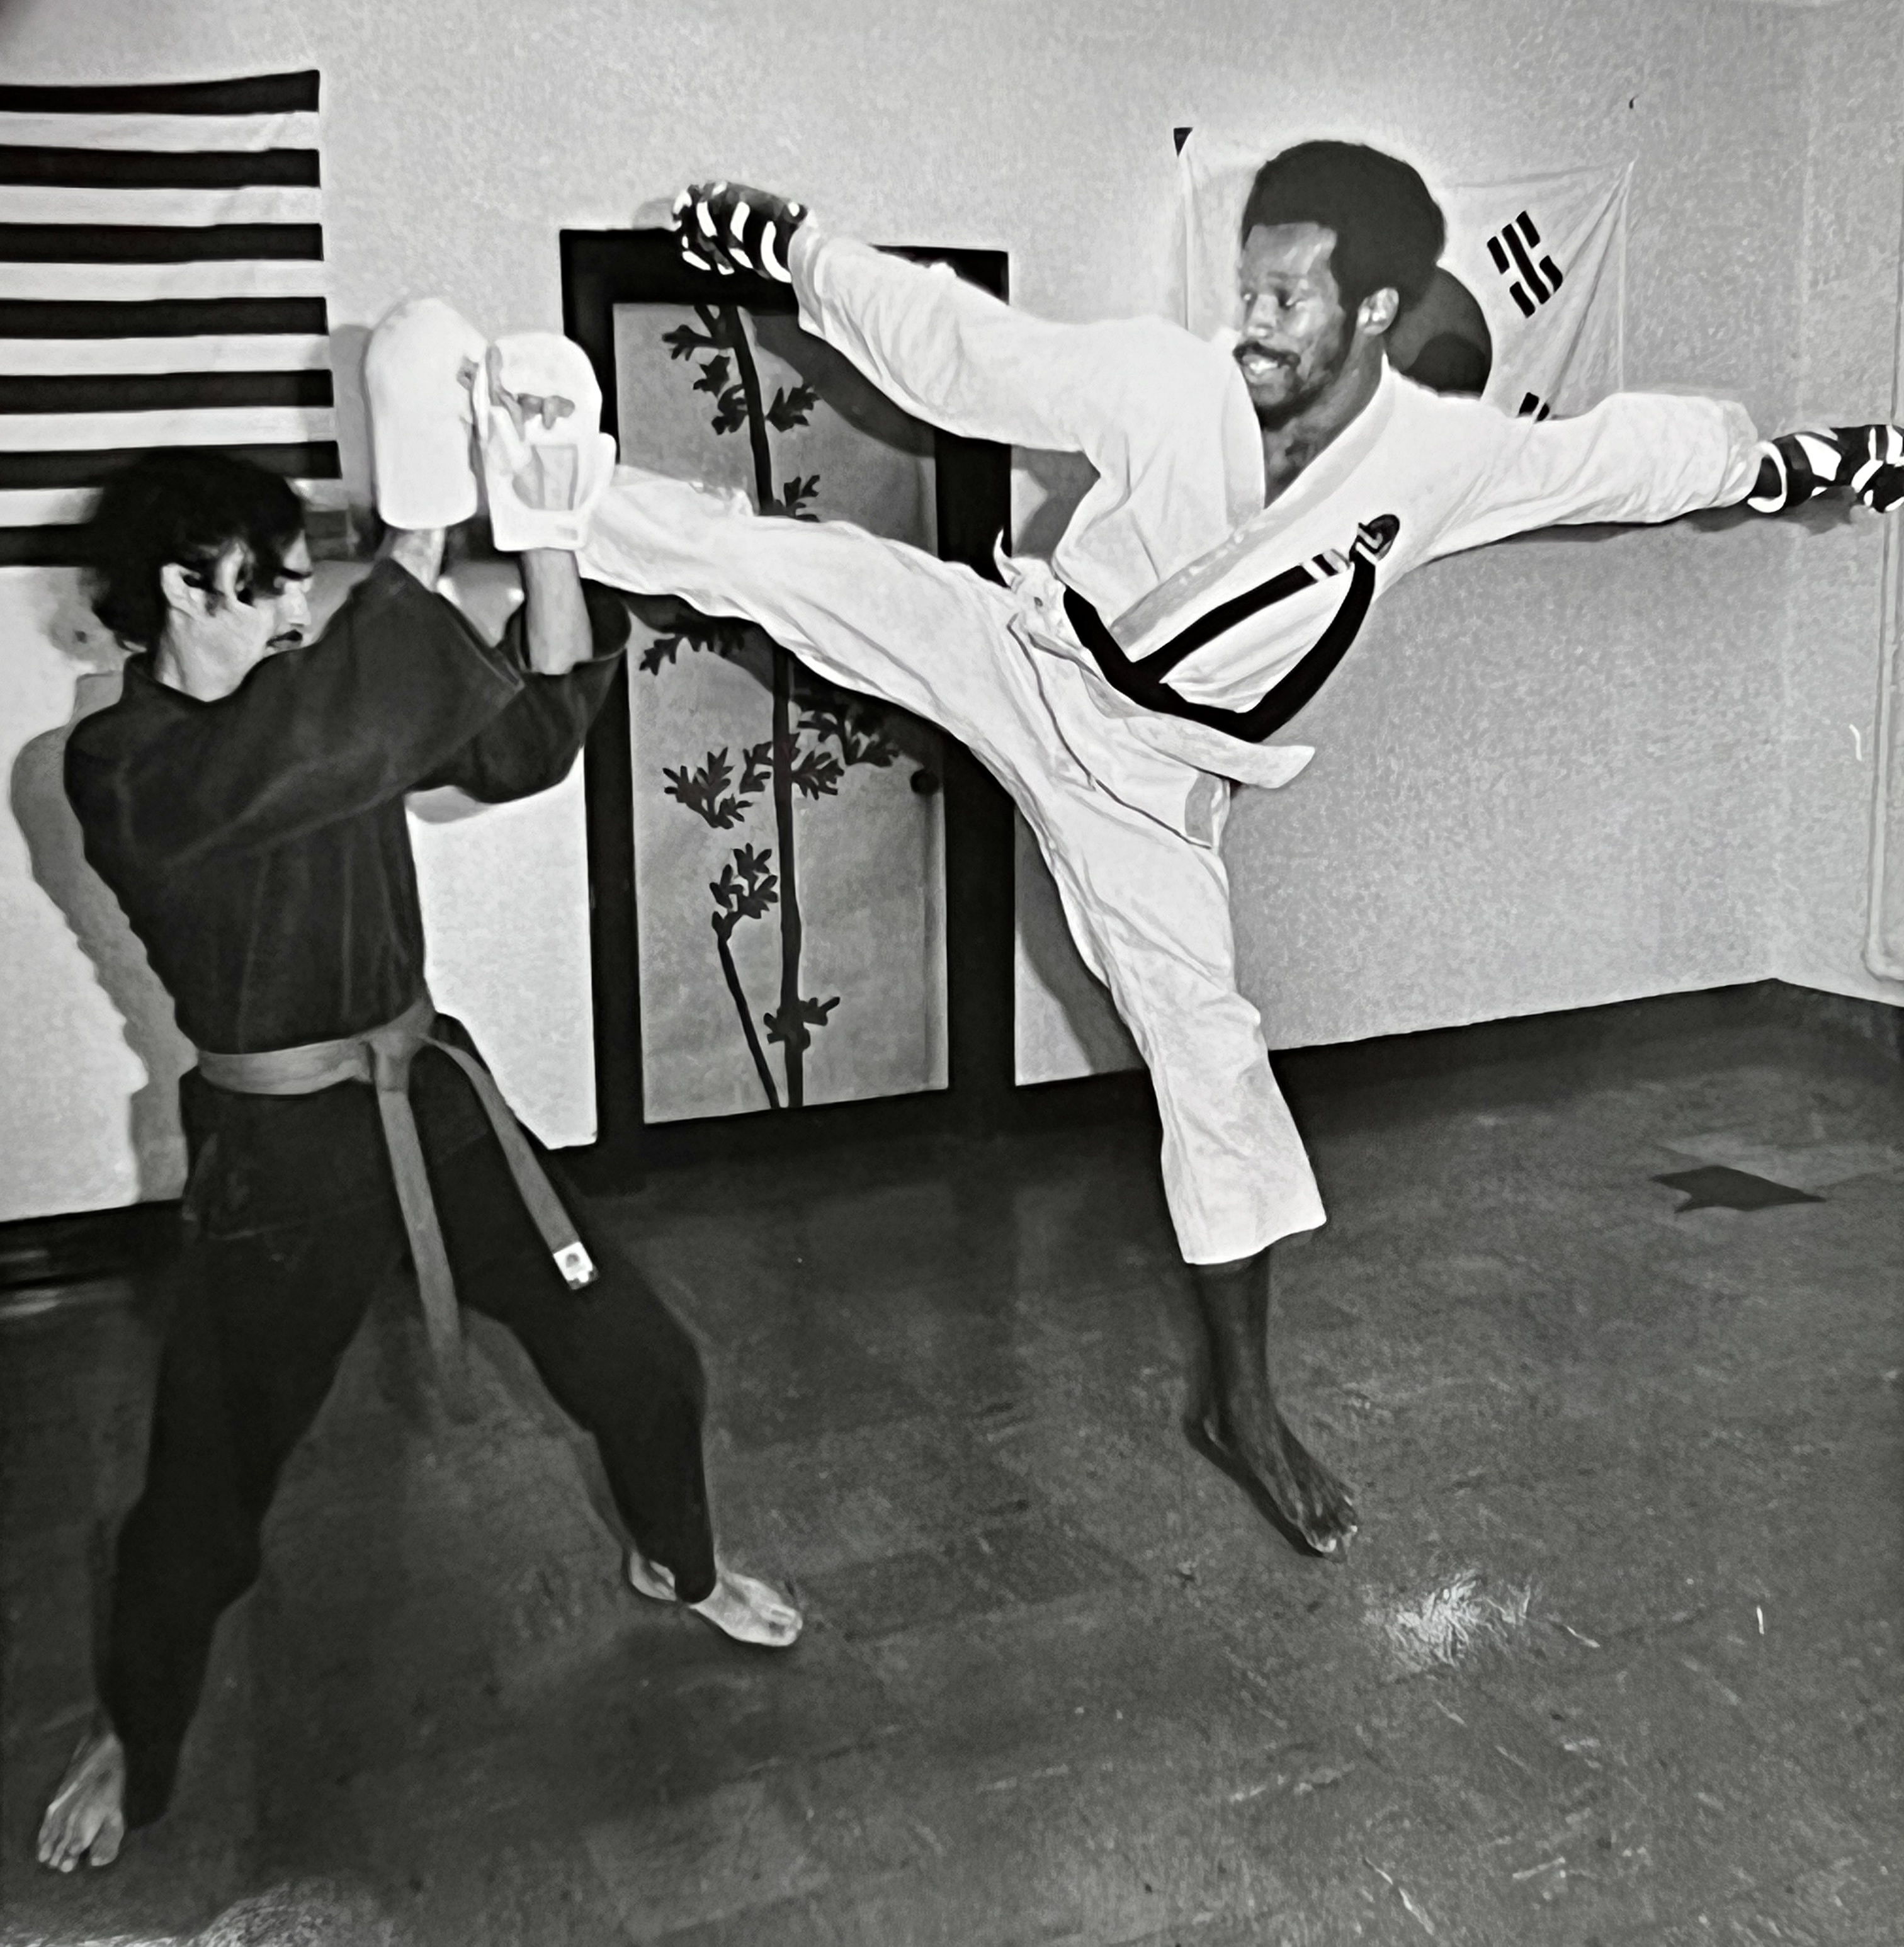 Lifelong Hamilton resident Bob “Moo Duk Kwan” Harris has been teaching karate since 1969, including more than 35 years of teaching at the Hamilton YMCA and his own studio.  He has reached Supreme Nim Grand Master status in karate and and is a two-time national champion.  Harris operates his photography business and Moo Duk Kwan Karate Temple at his South Second Street studio.  NICK GRAHAM/STAFF Hamilton resident Bob “Moo Duk Kwan” Harris has been teaching karate since 1969, including more than 35 years of teaching at the Hamilton YMCA and his own studio.  He has reached Supreme Nim Grand Master status in karate and and is a two-time national champion.  Harris operates his photography business and Moo Duk Kwan Karate Temple at his South Second Street studio.  Harris is pictured, right, practicing with student Darrell Croucher over 40 years ago in a Journal-News photo by John Janco.